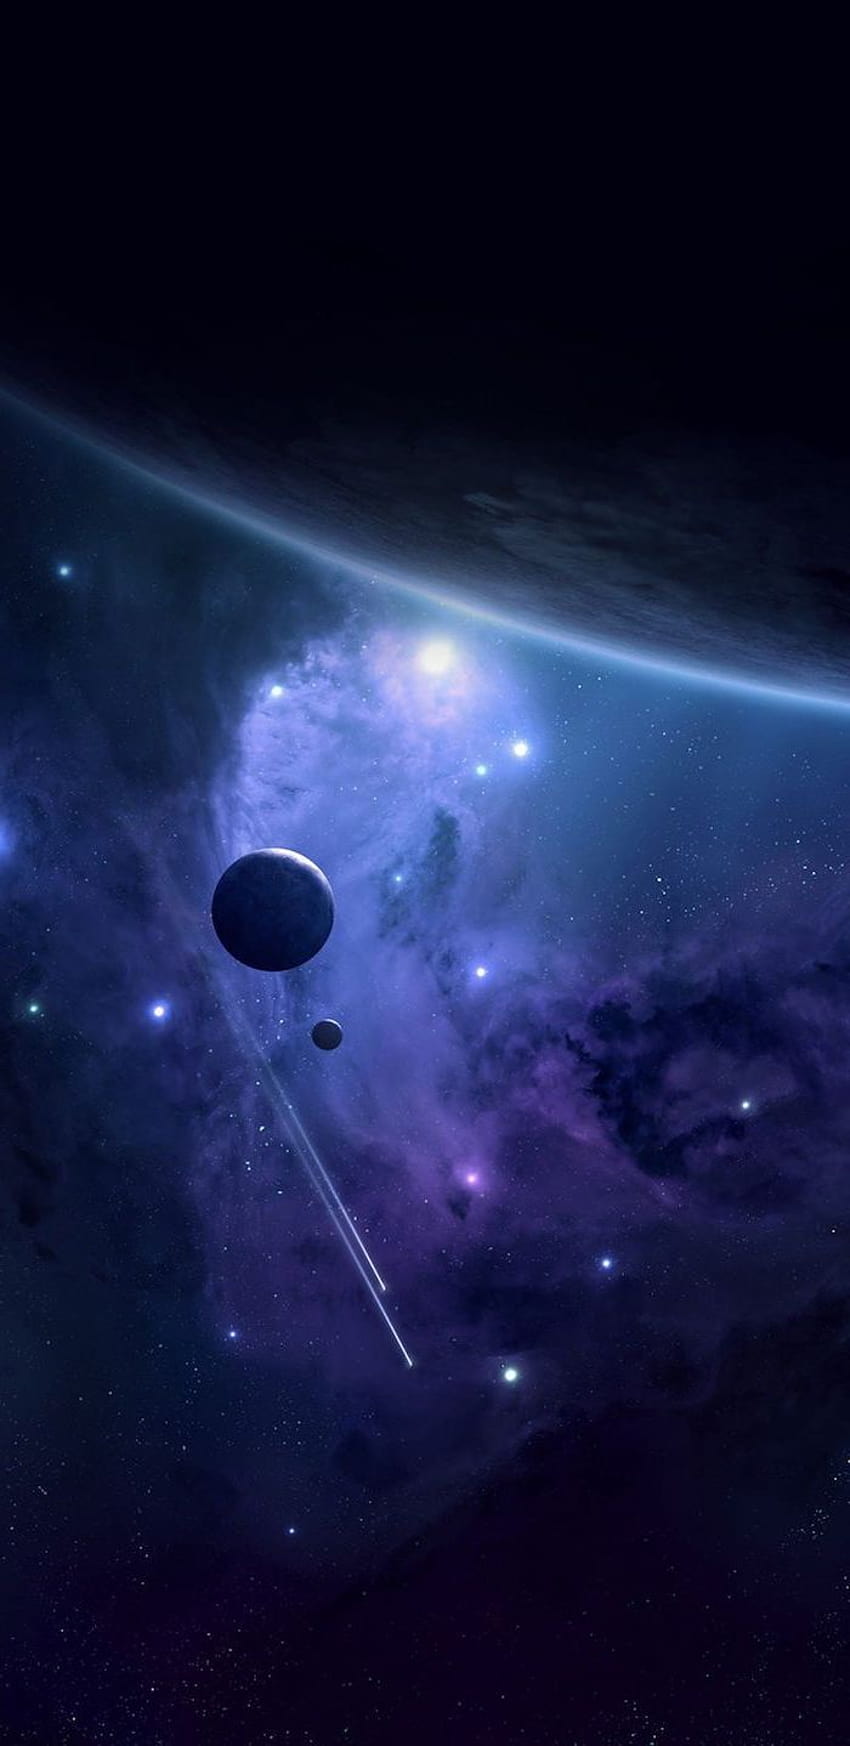 HD wallpaper Planets solar system wallpaper Space Universe Galaxy  star  space  Wallpaper Flare